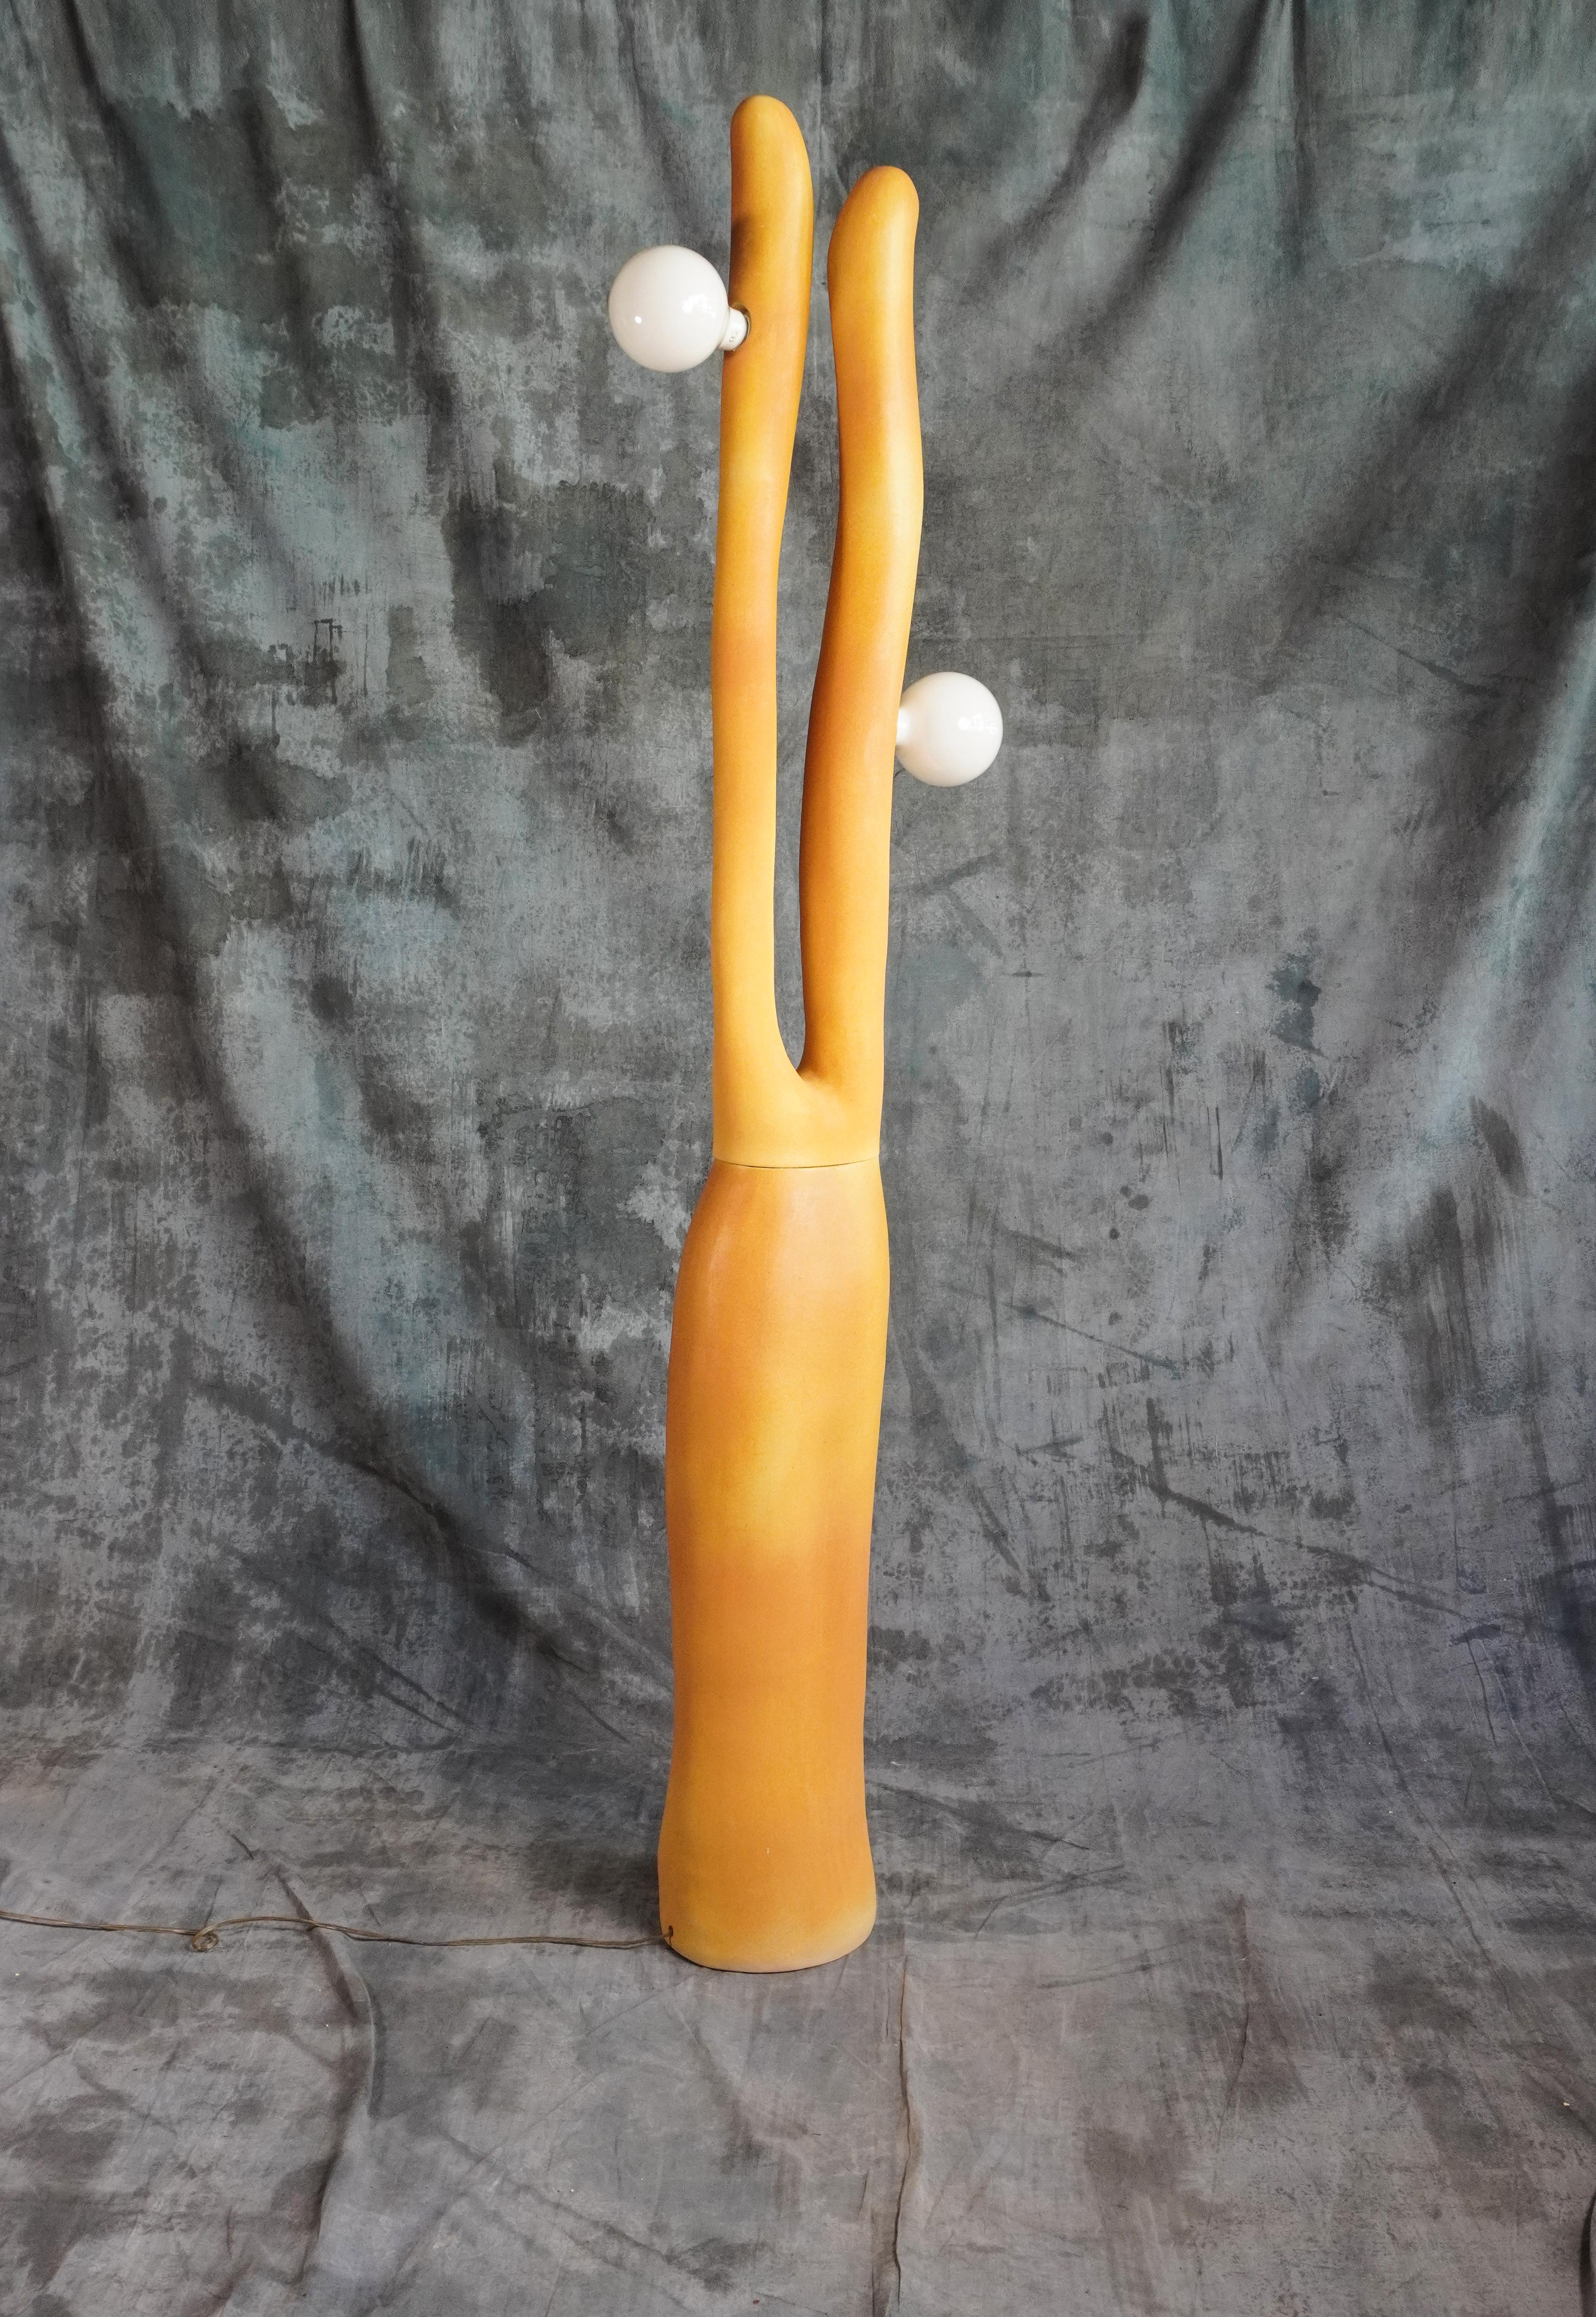 Unique ceramic floor lamp Sprouts by Jan Ernst
Dimensions: W 40 x D 30 x H 200 cm
Materials: Stoneware

Glazed to client specification.
Other dimensions available

The Origin Collection is a collaboration between Jan Ernst and Colin Braye.